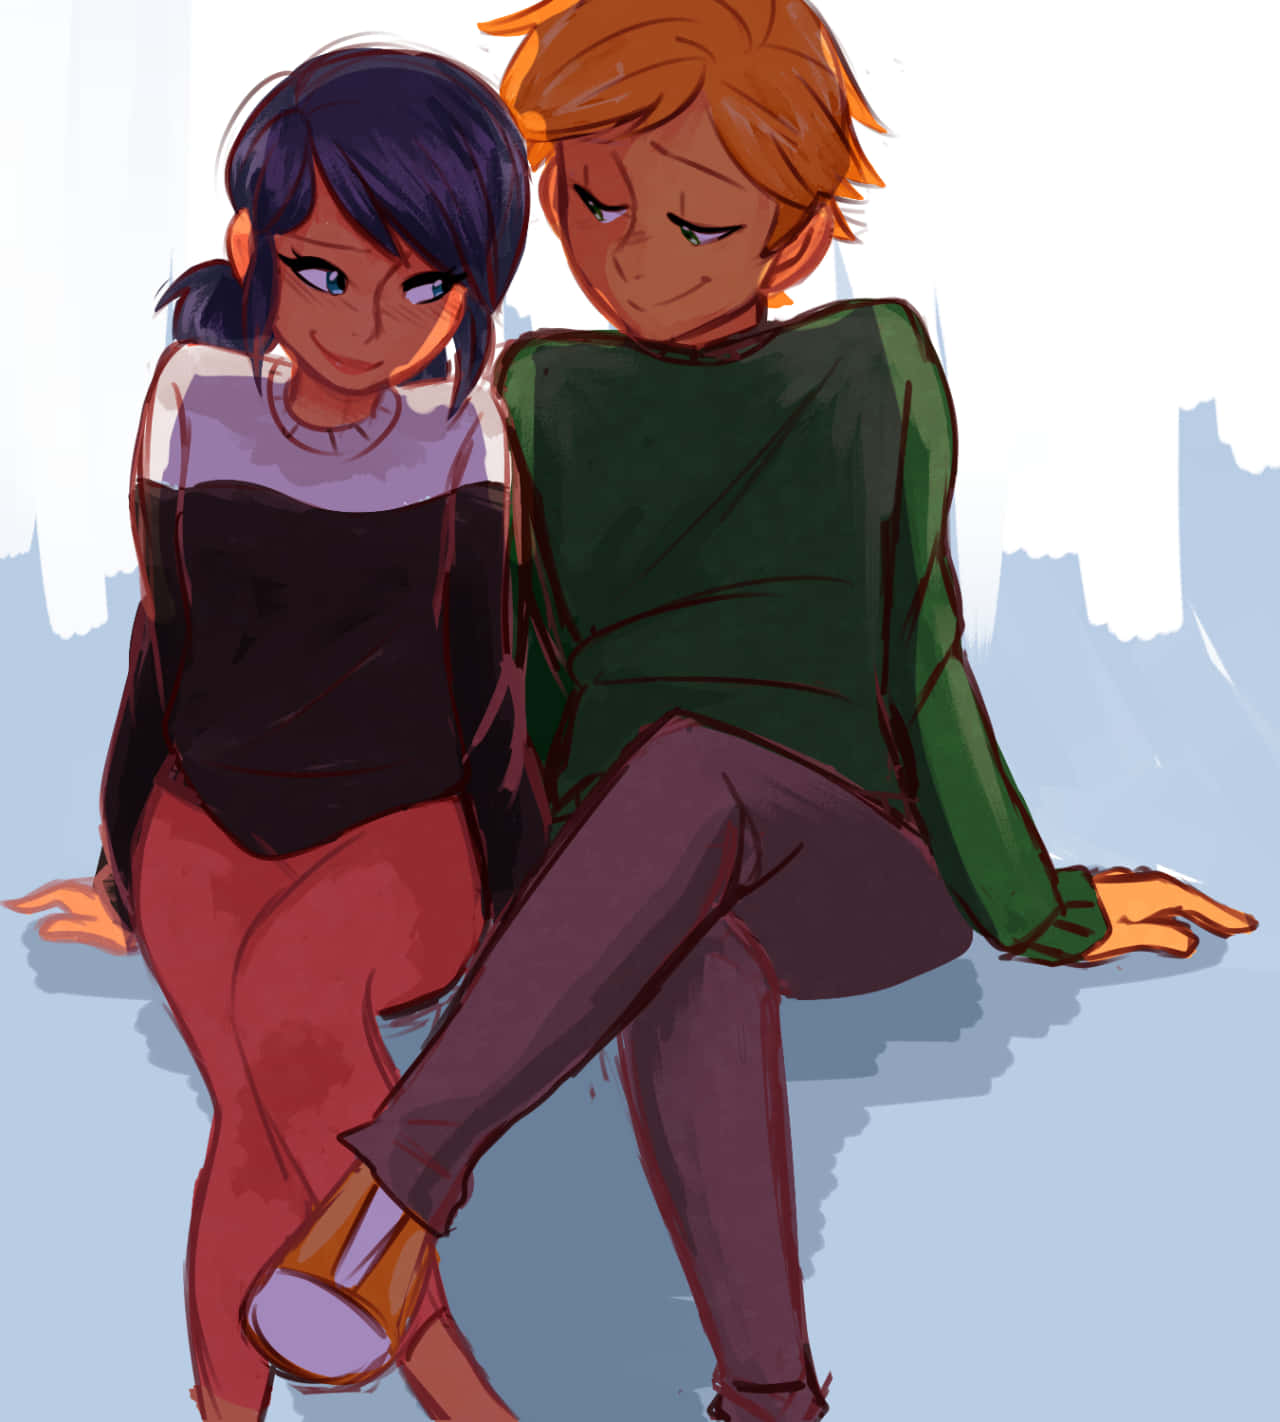 "The future superheroes, Marinette and Adrien" Wallpaper